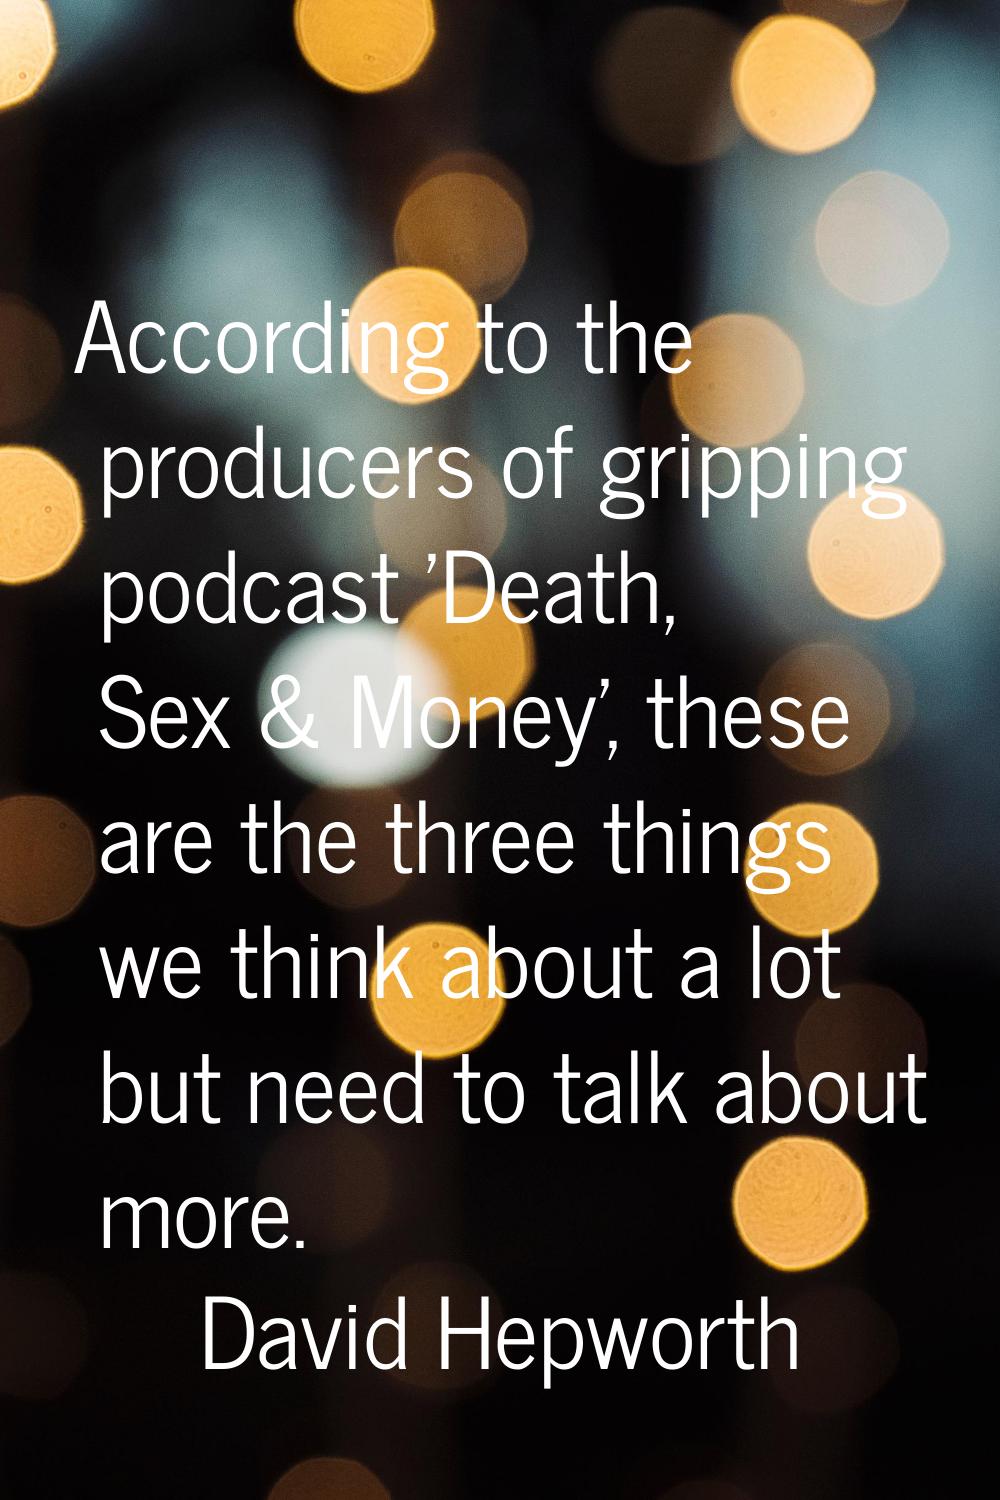 According to the producers of gripping podcast 'Death, Sex & Money', these are the three things we 